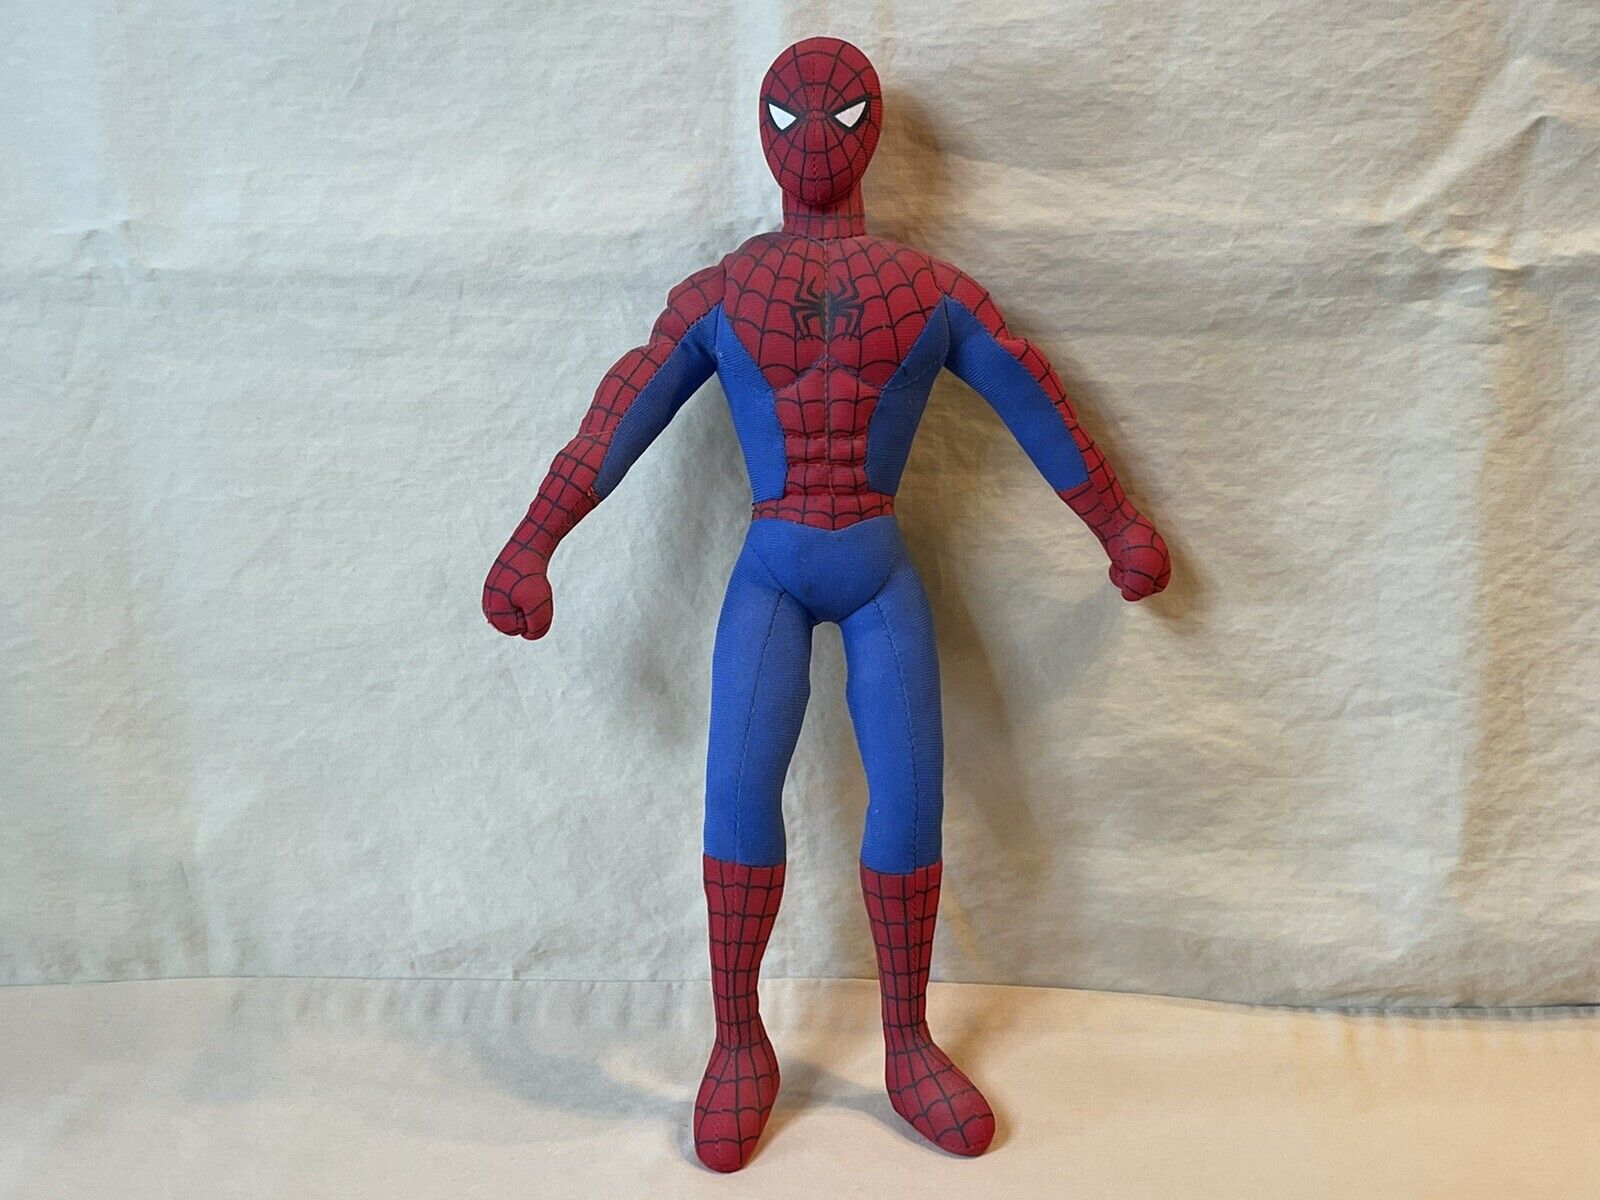 2006 12” Applause Rare Spider-Man Action Plush Doll Poseable Wired Limbs 